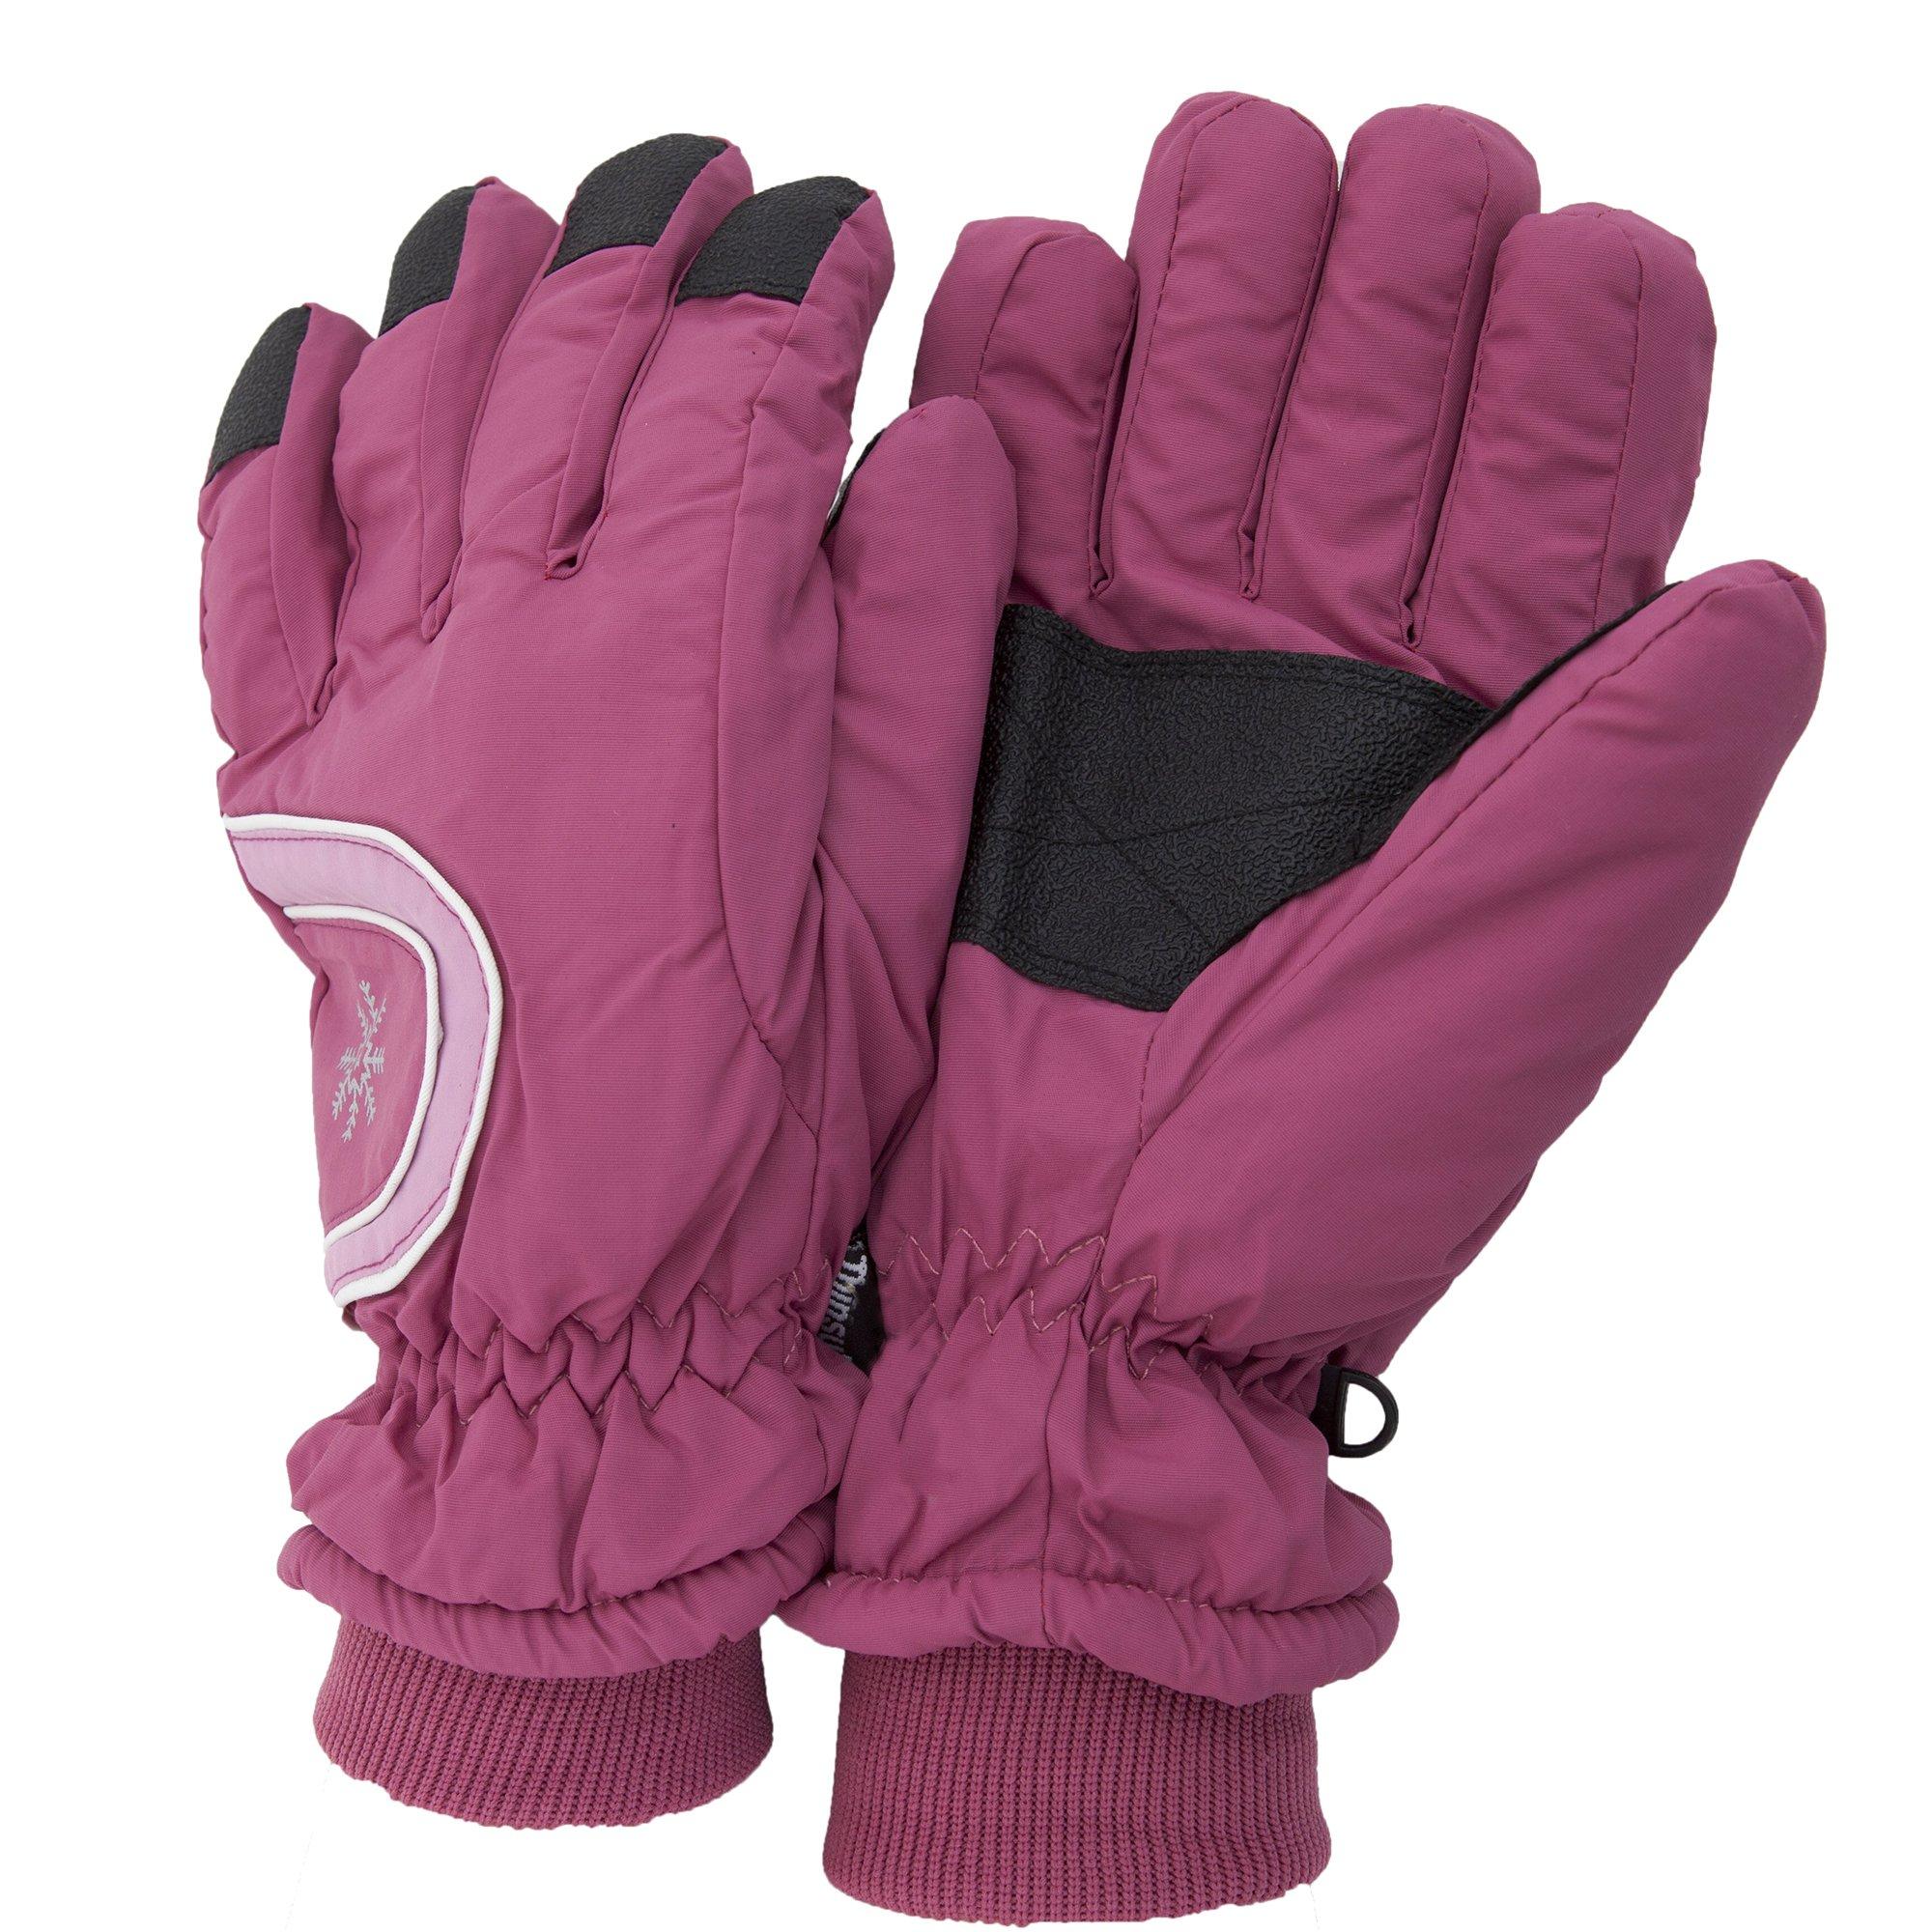 Image of Floso THINSULATE extra warm Thermal Padded WinterSki Handschuhe mit Palm Grip (3M 40g) - ONE SIZE